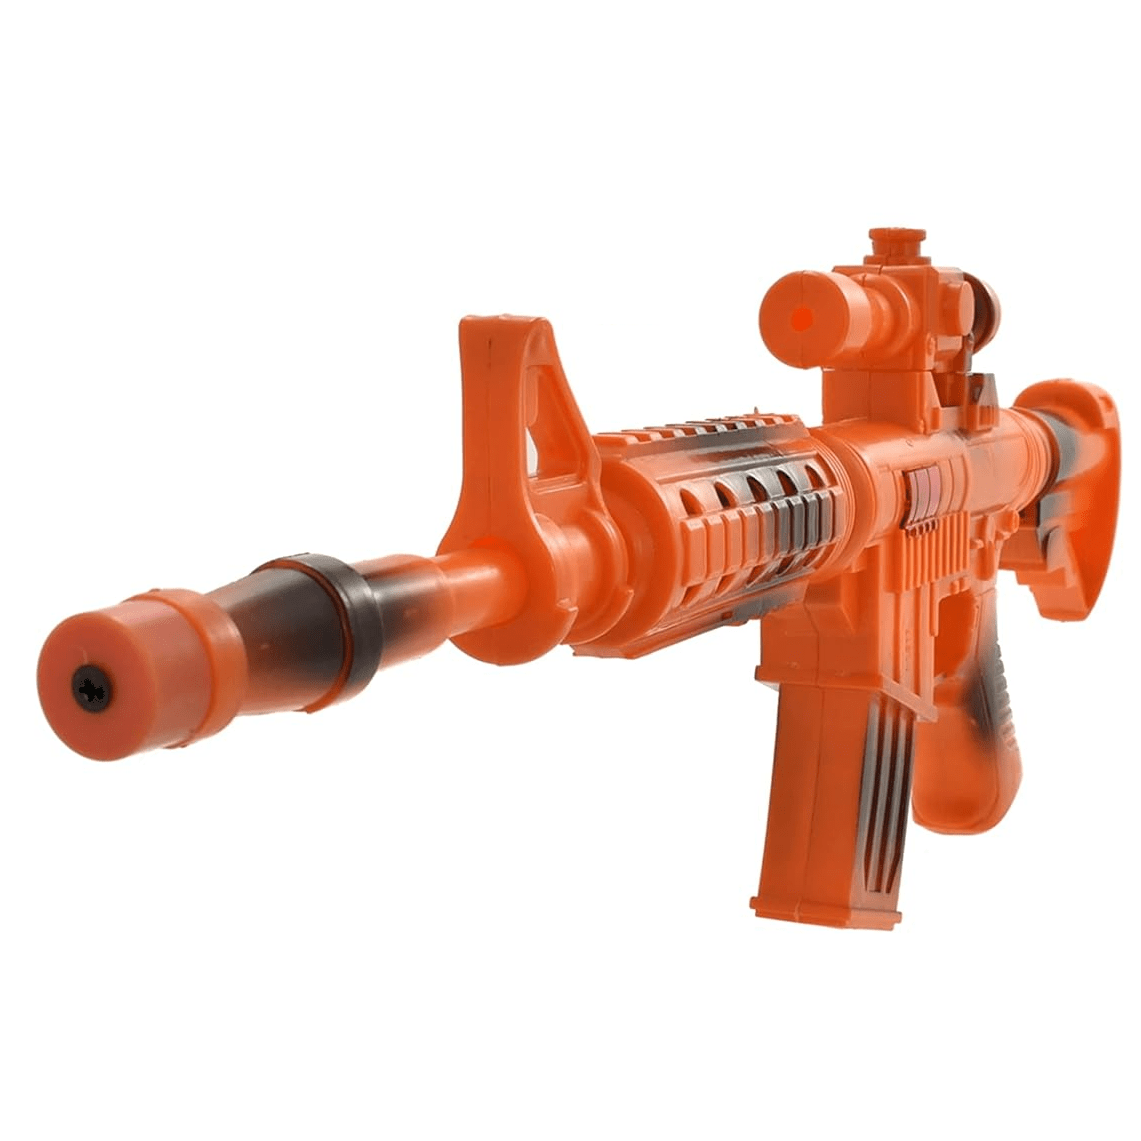 Toys N Tuck:Combat Mission Assault Rifle,Kandy Toys